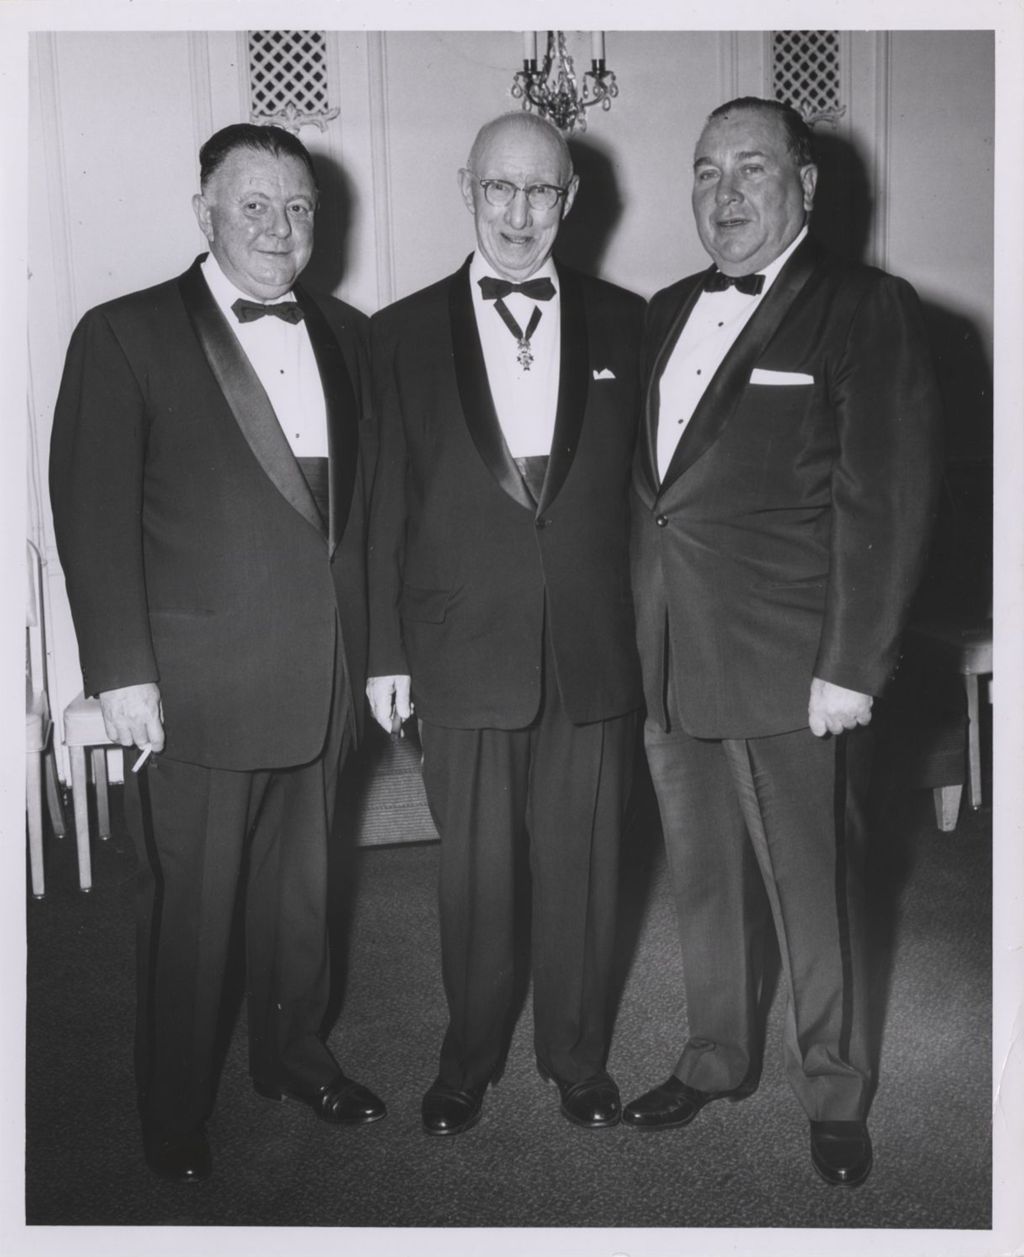 Richard J. Daley and two men in tuxedos